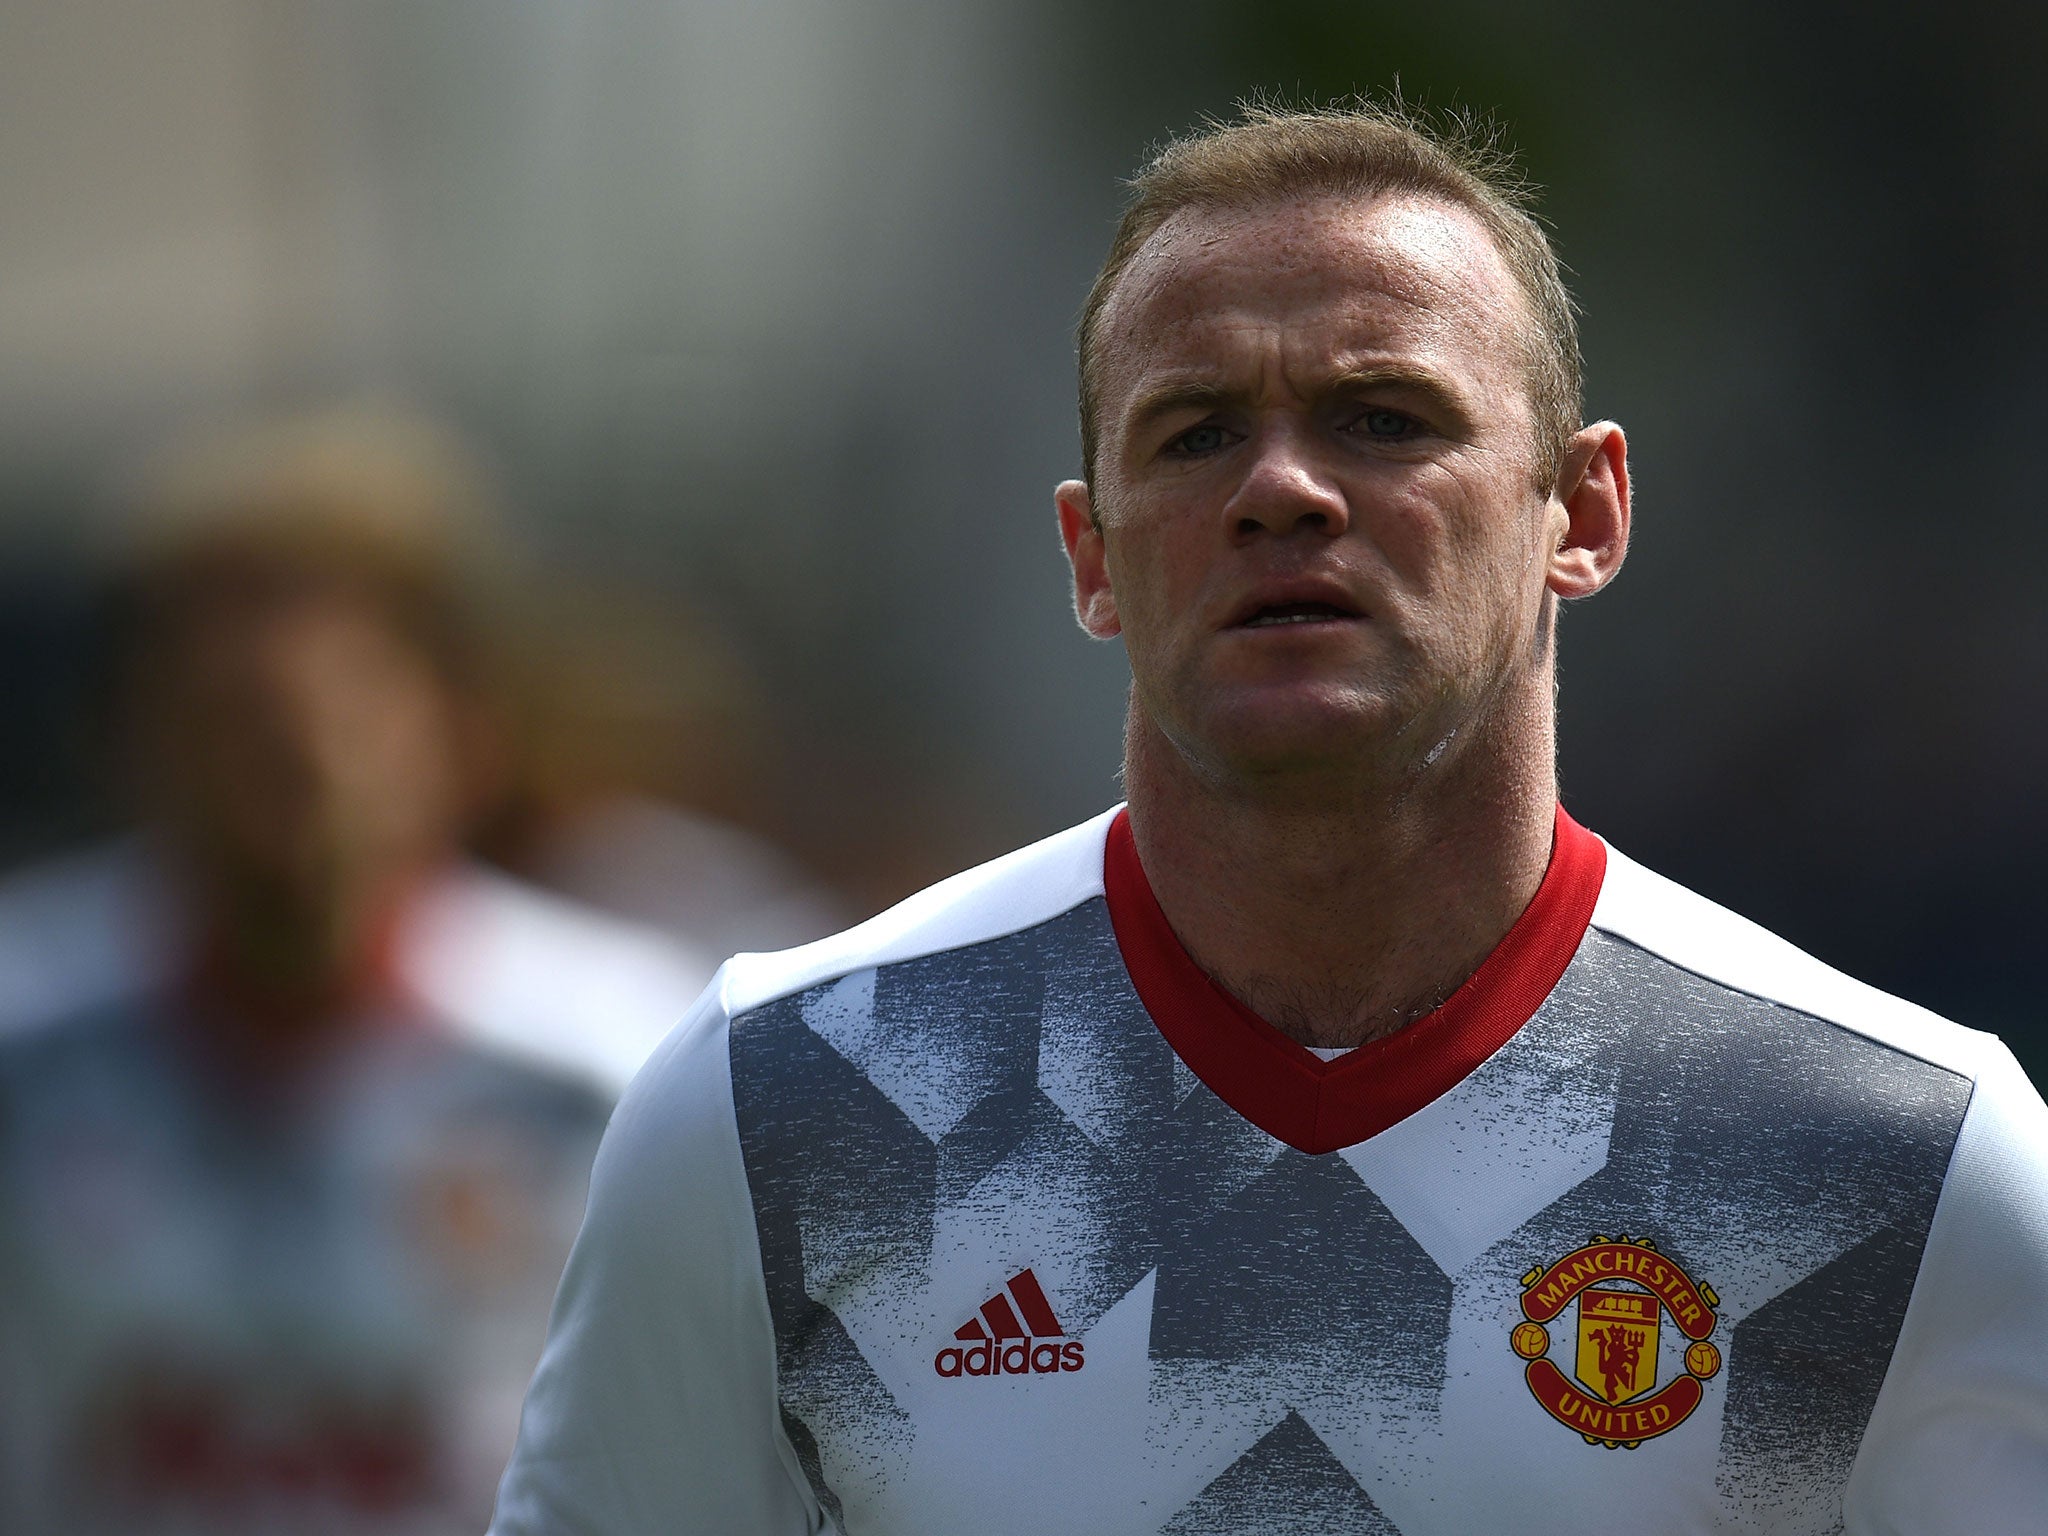 Many critics have called time on Rooney's career at Old Trafford